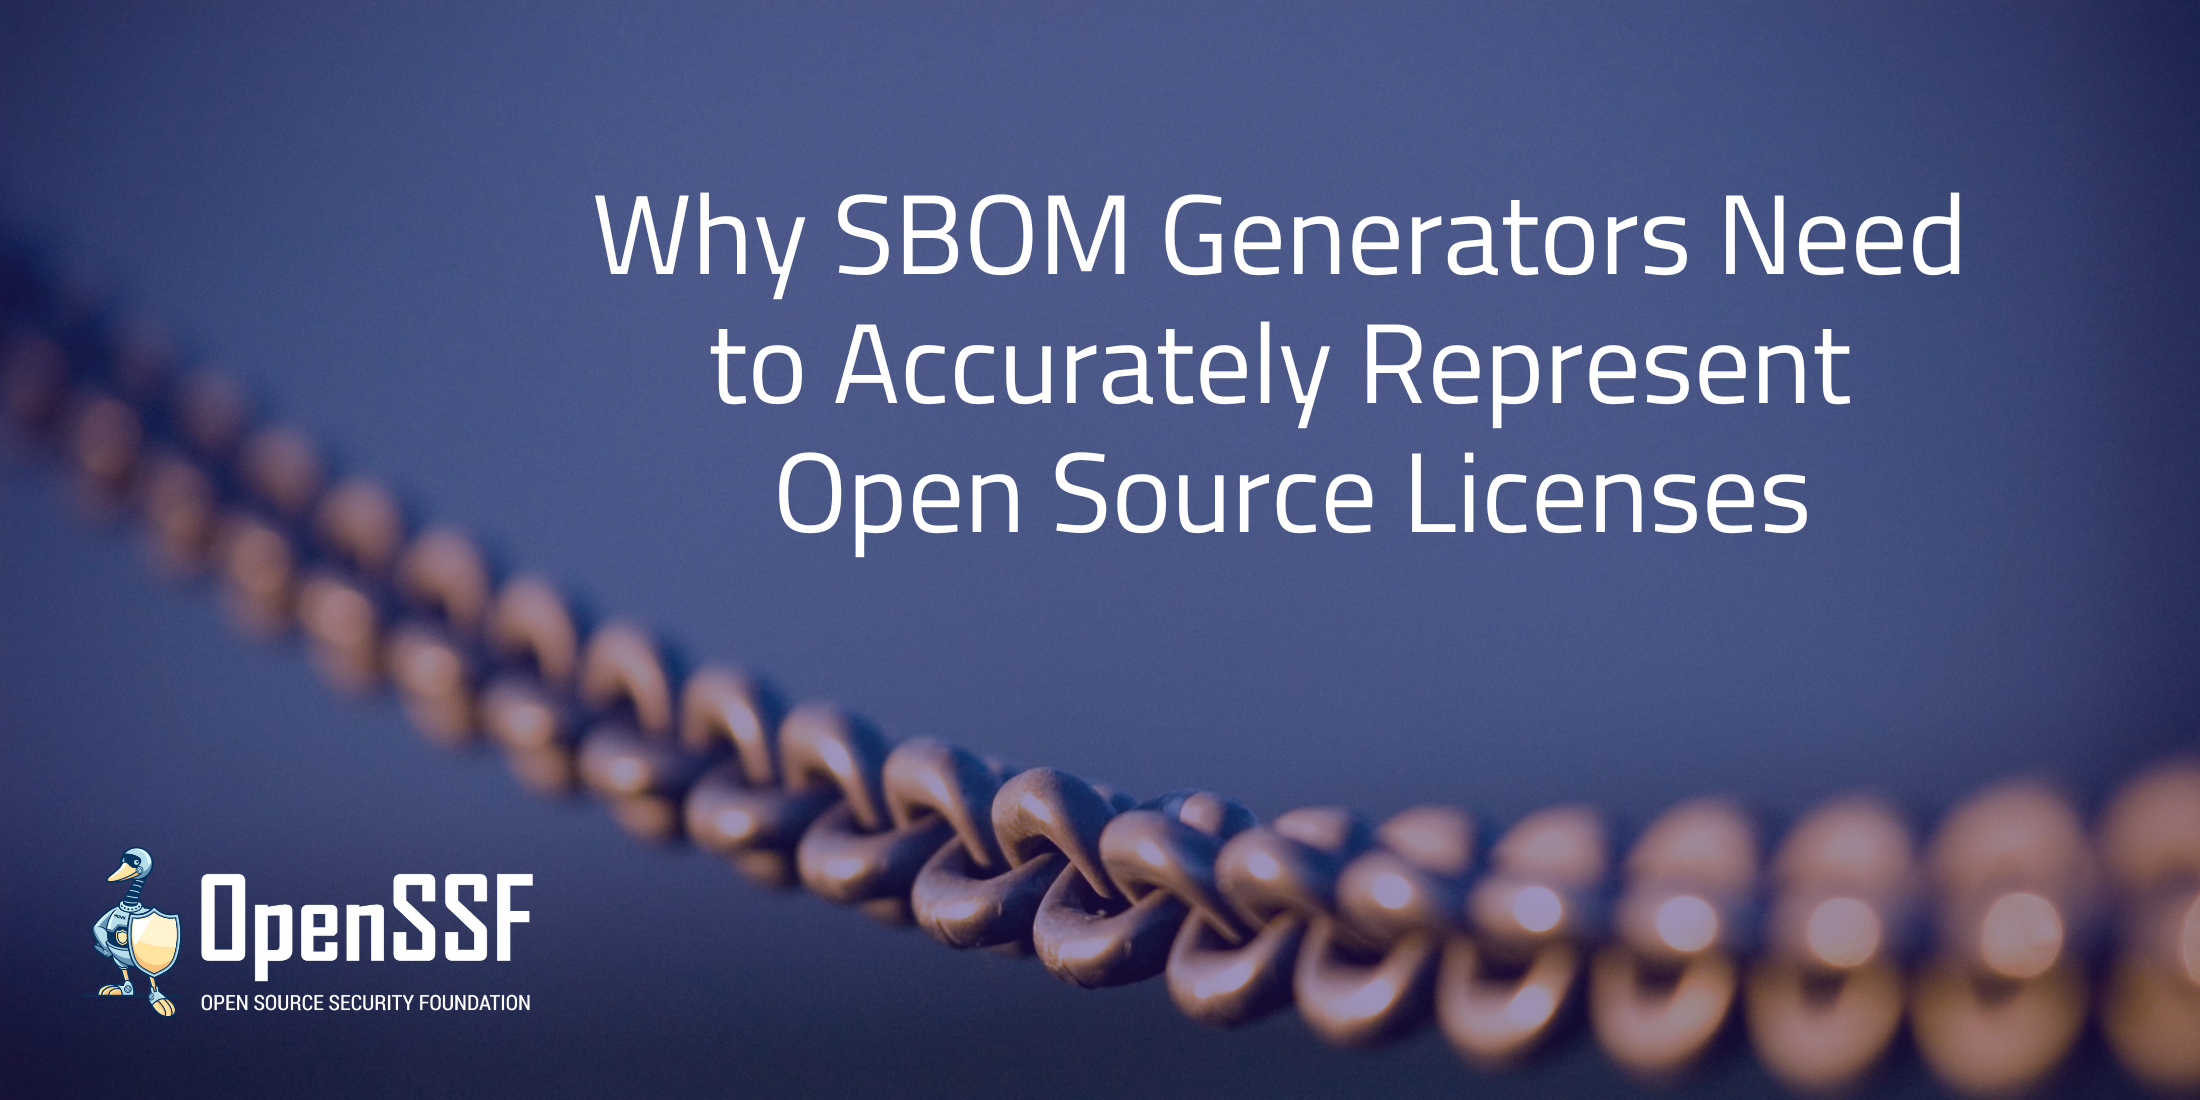 OpenSSF Why SBOM Generators Need to Accurately Represent Open Source Licenses